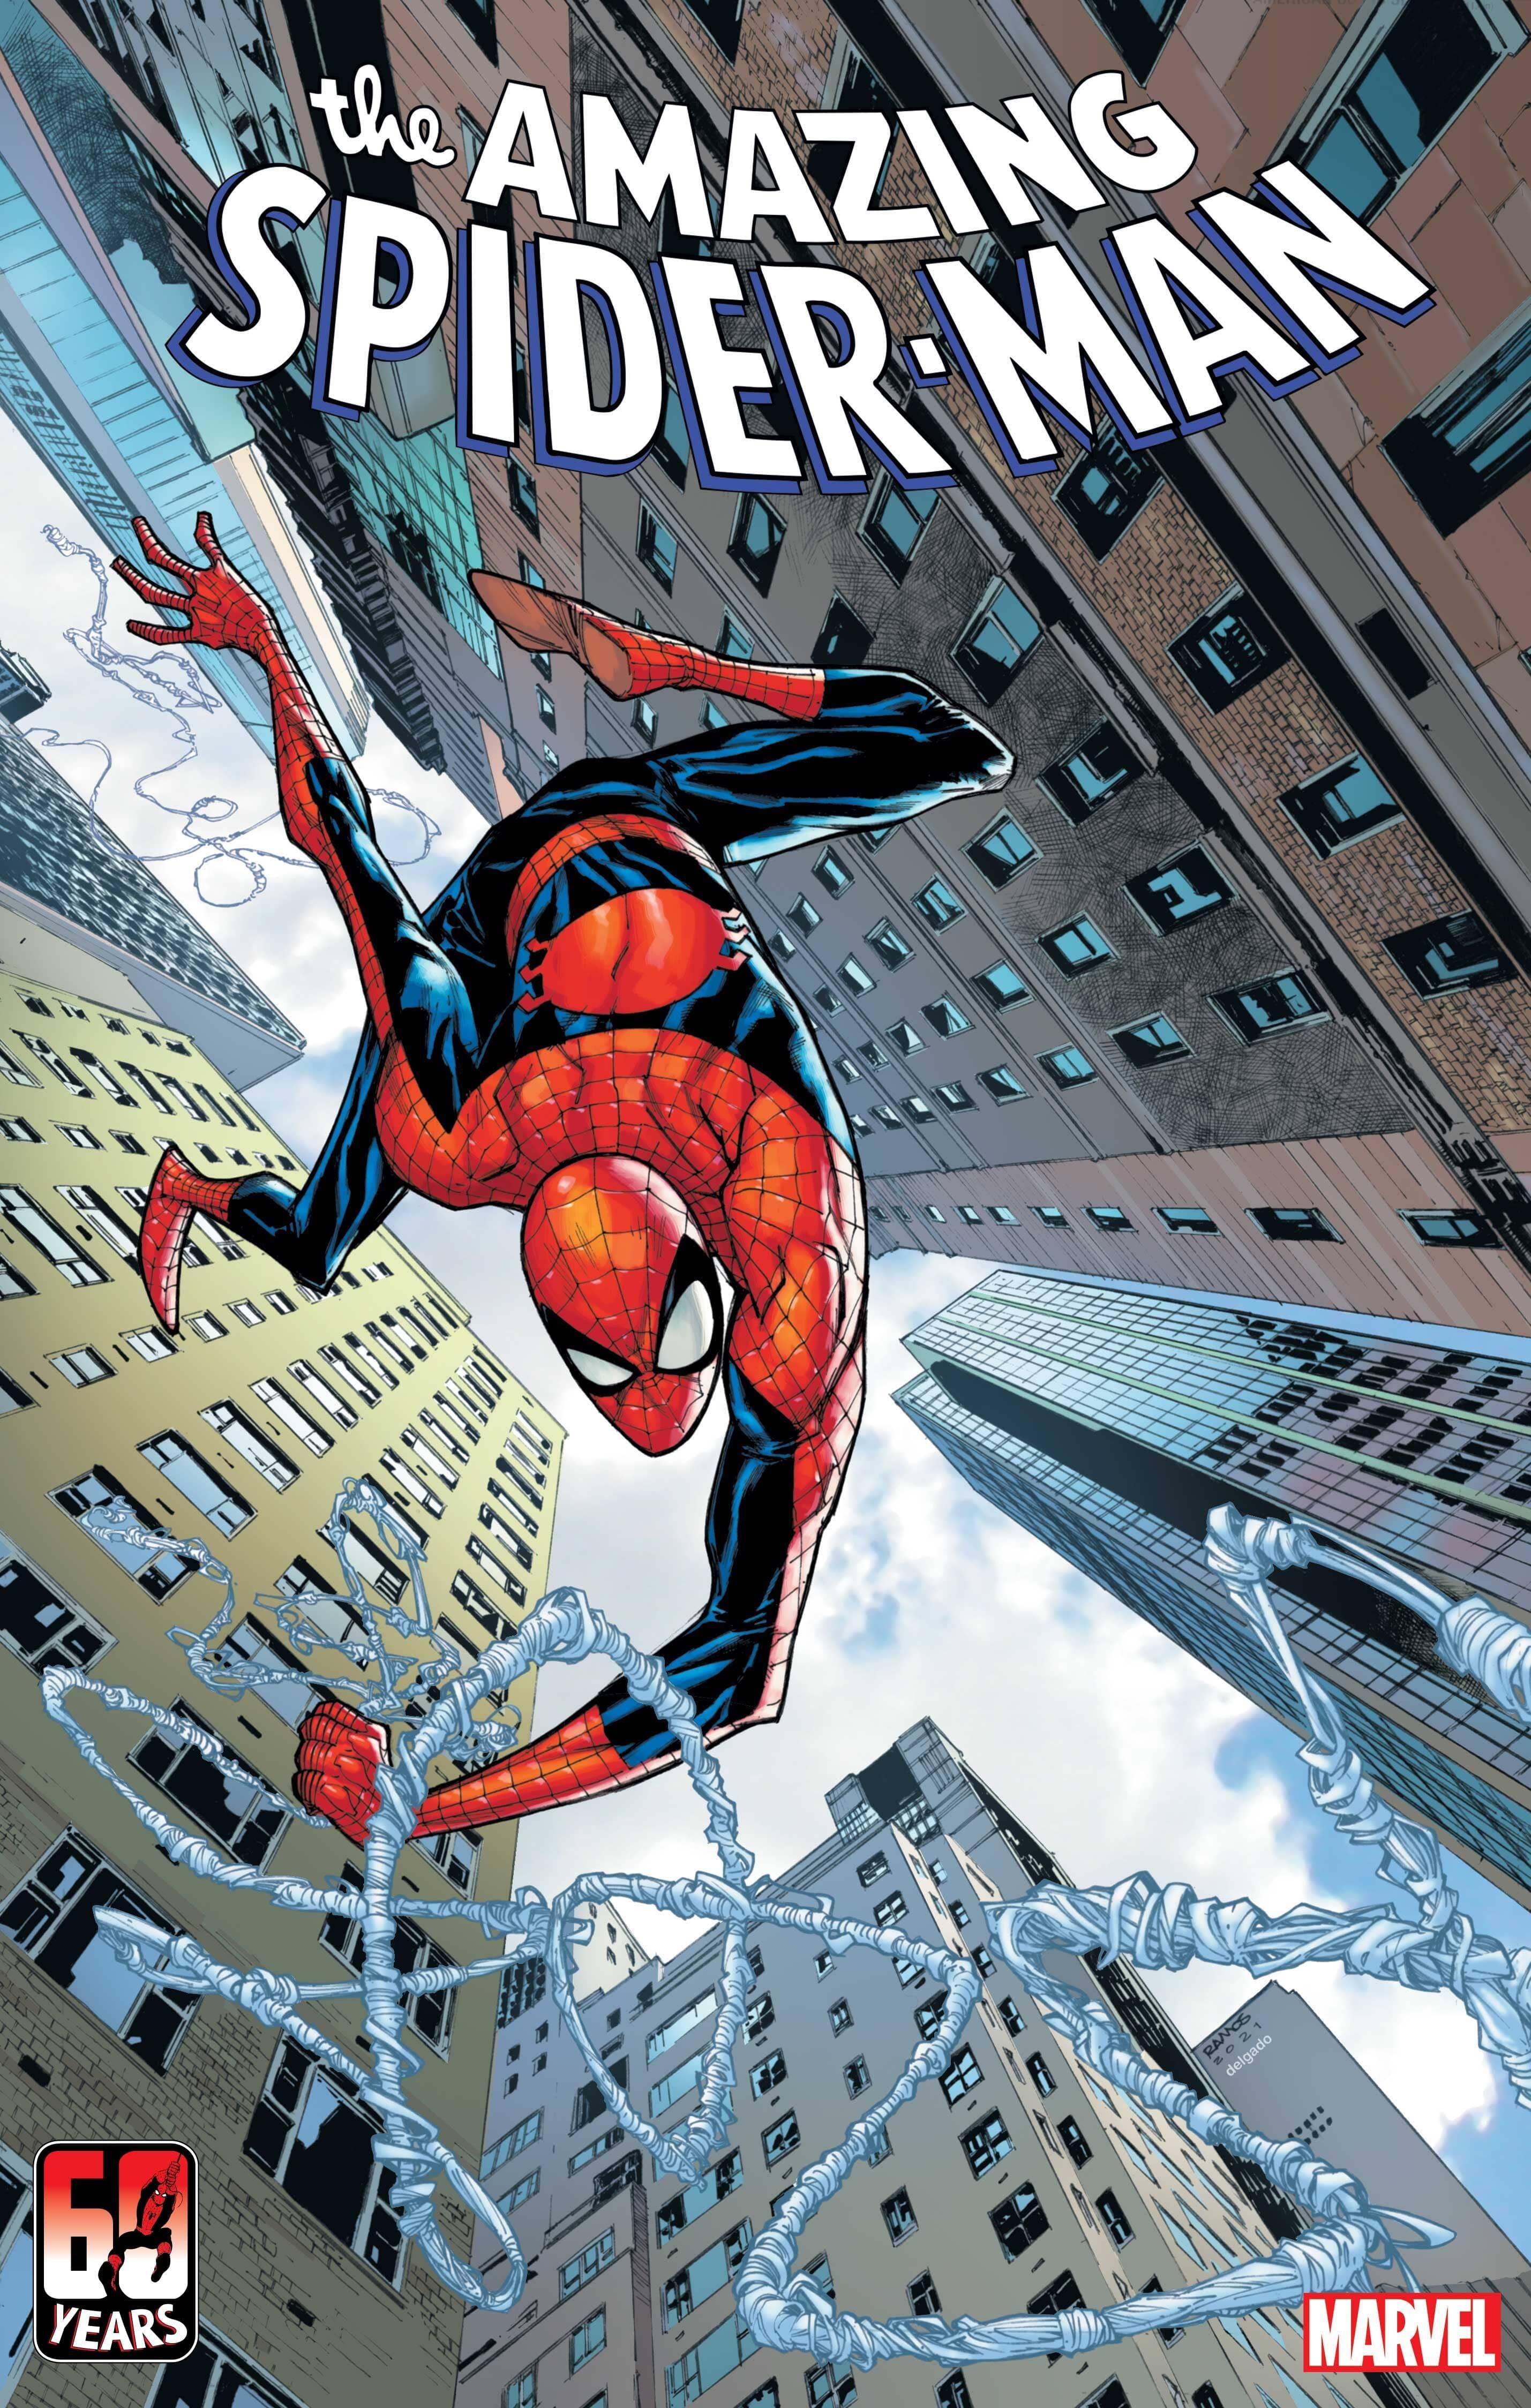 Peter Parker on the cover of Amazing Spider-Man 1 by Humberto Ramos